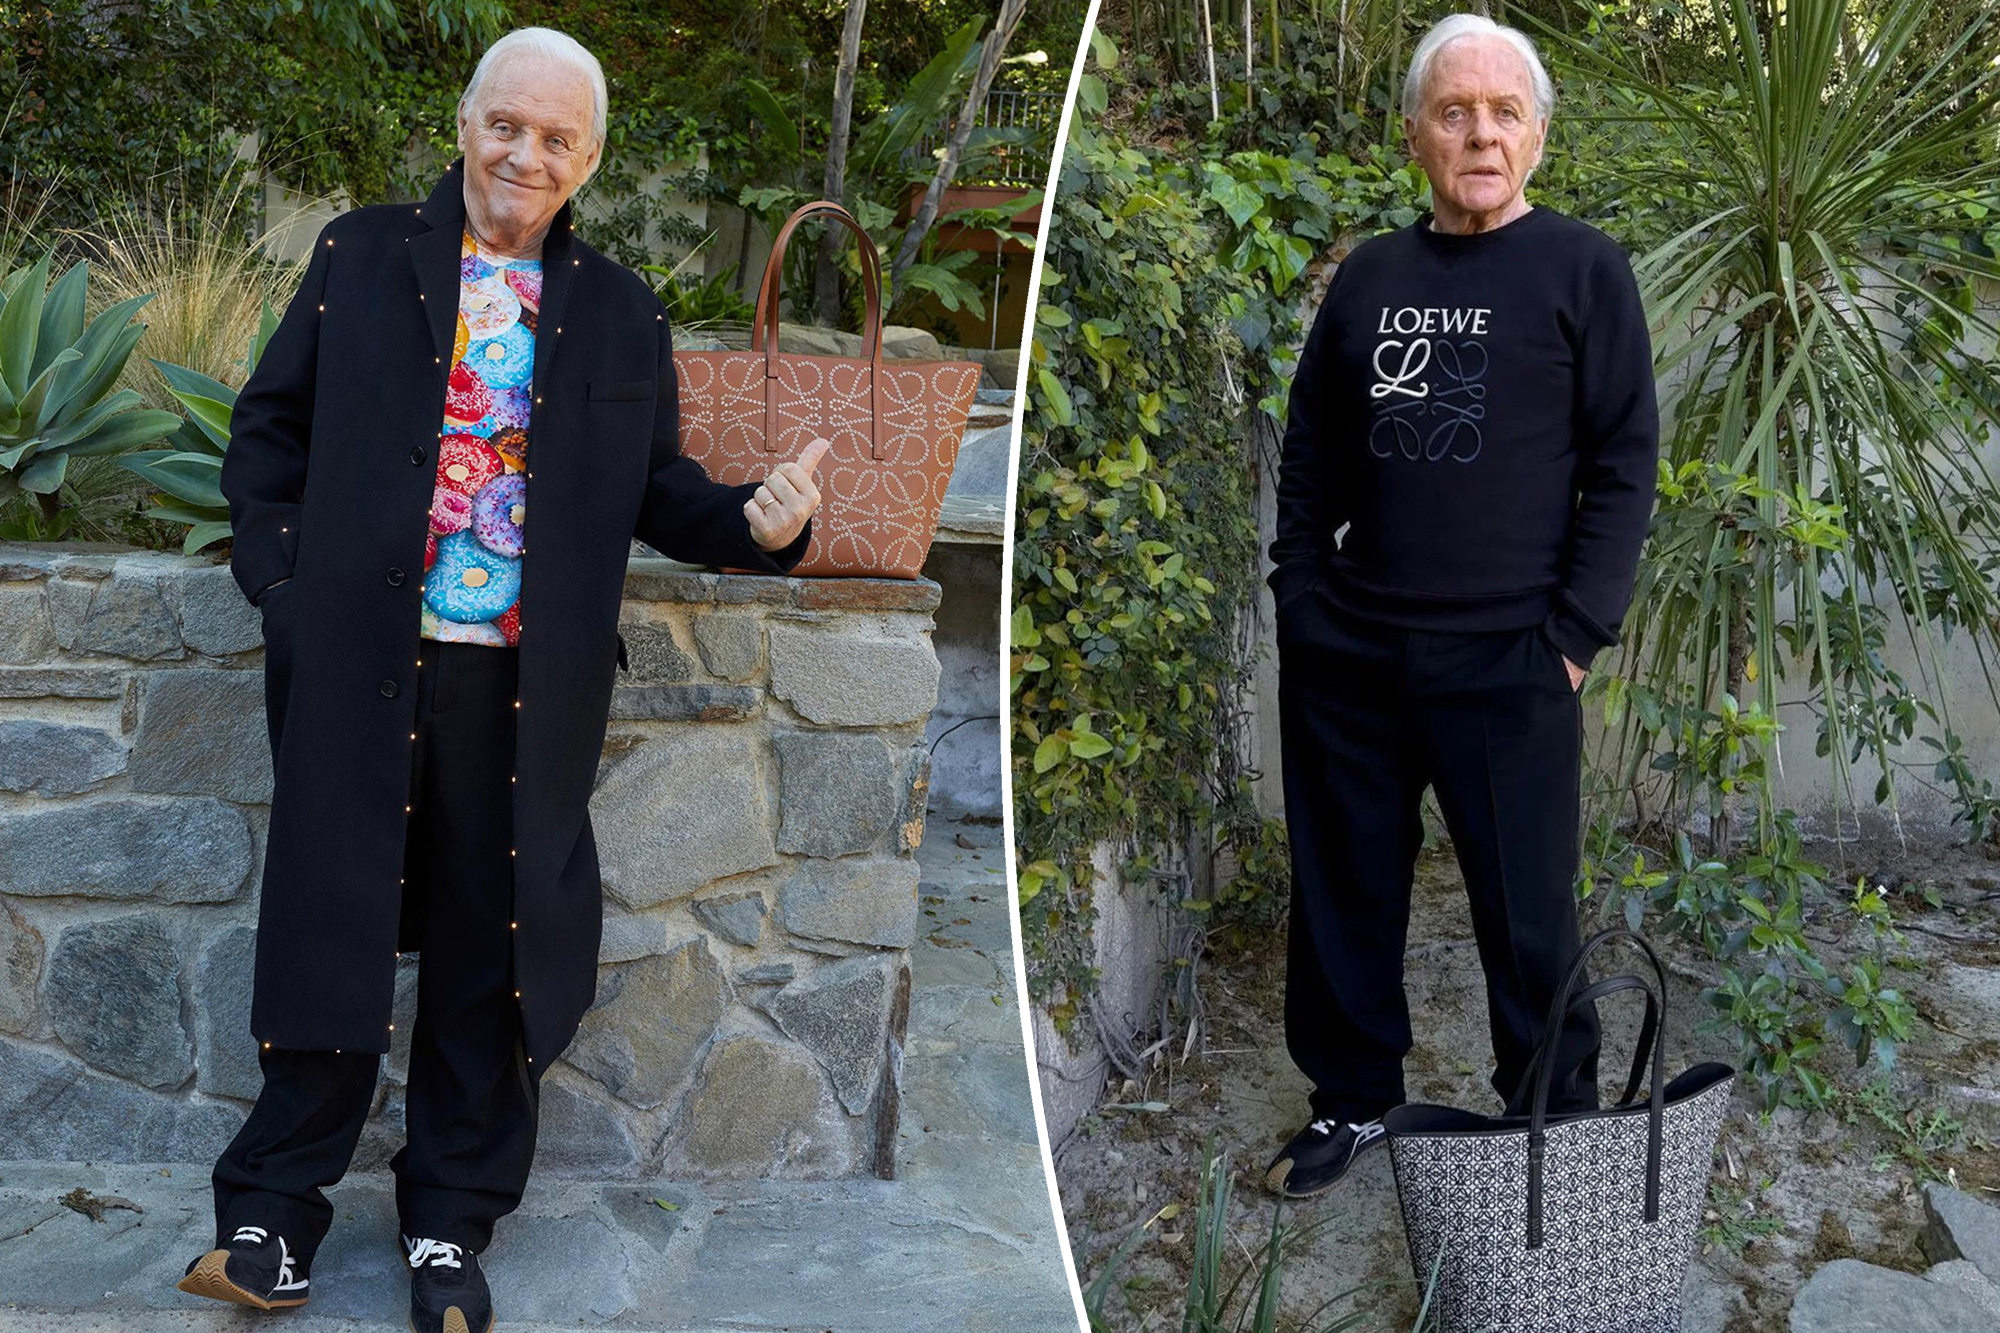 anthony Hopkins Models For Loewe Fashion Campaign At 84